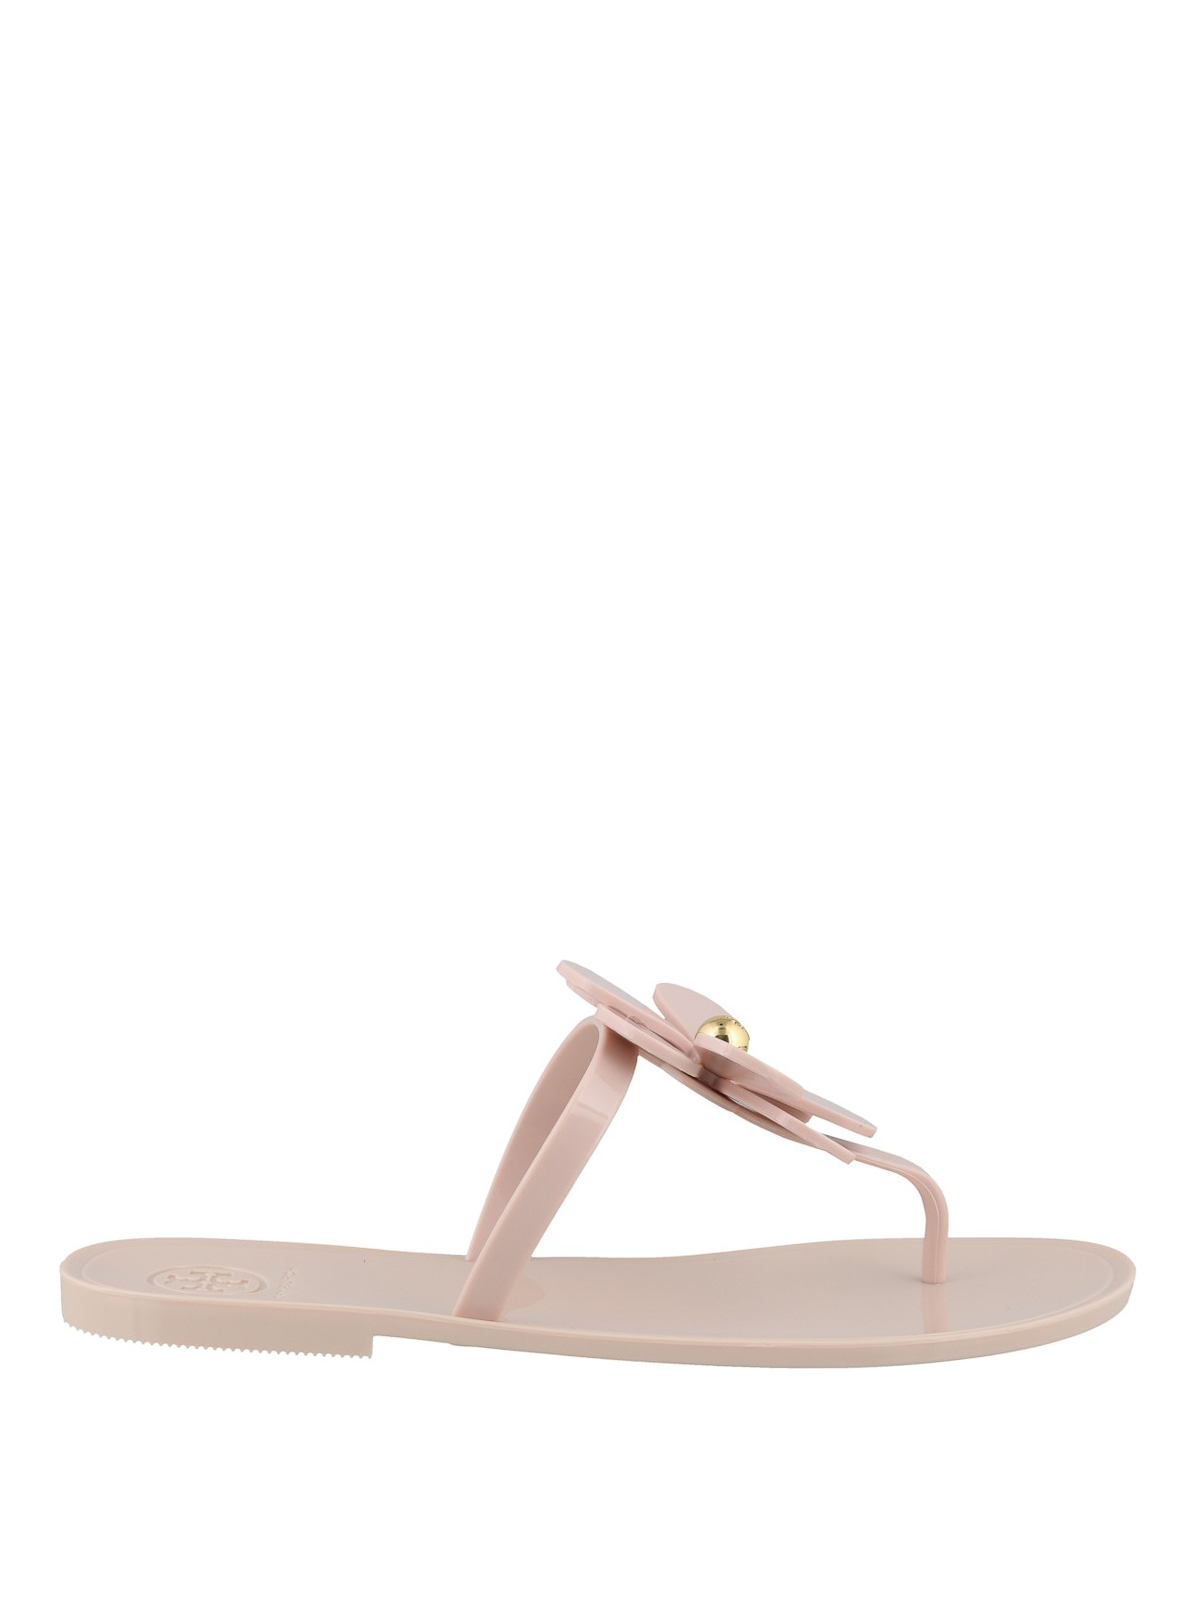 tory burch flower jelly thong sandals